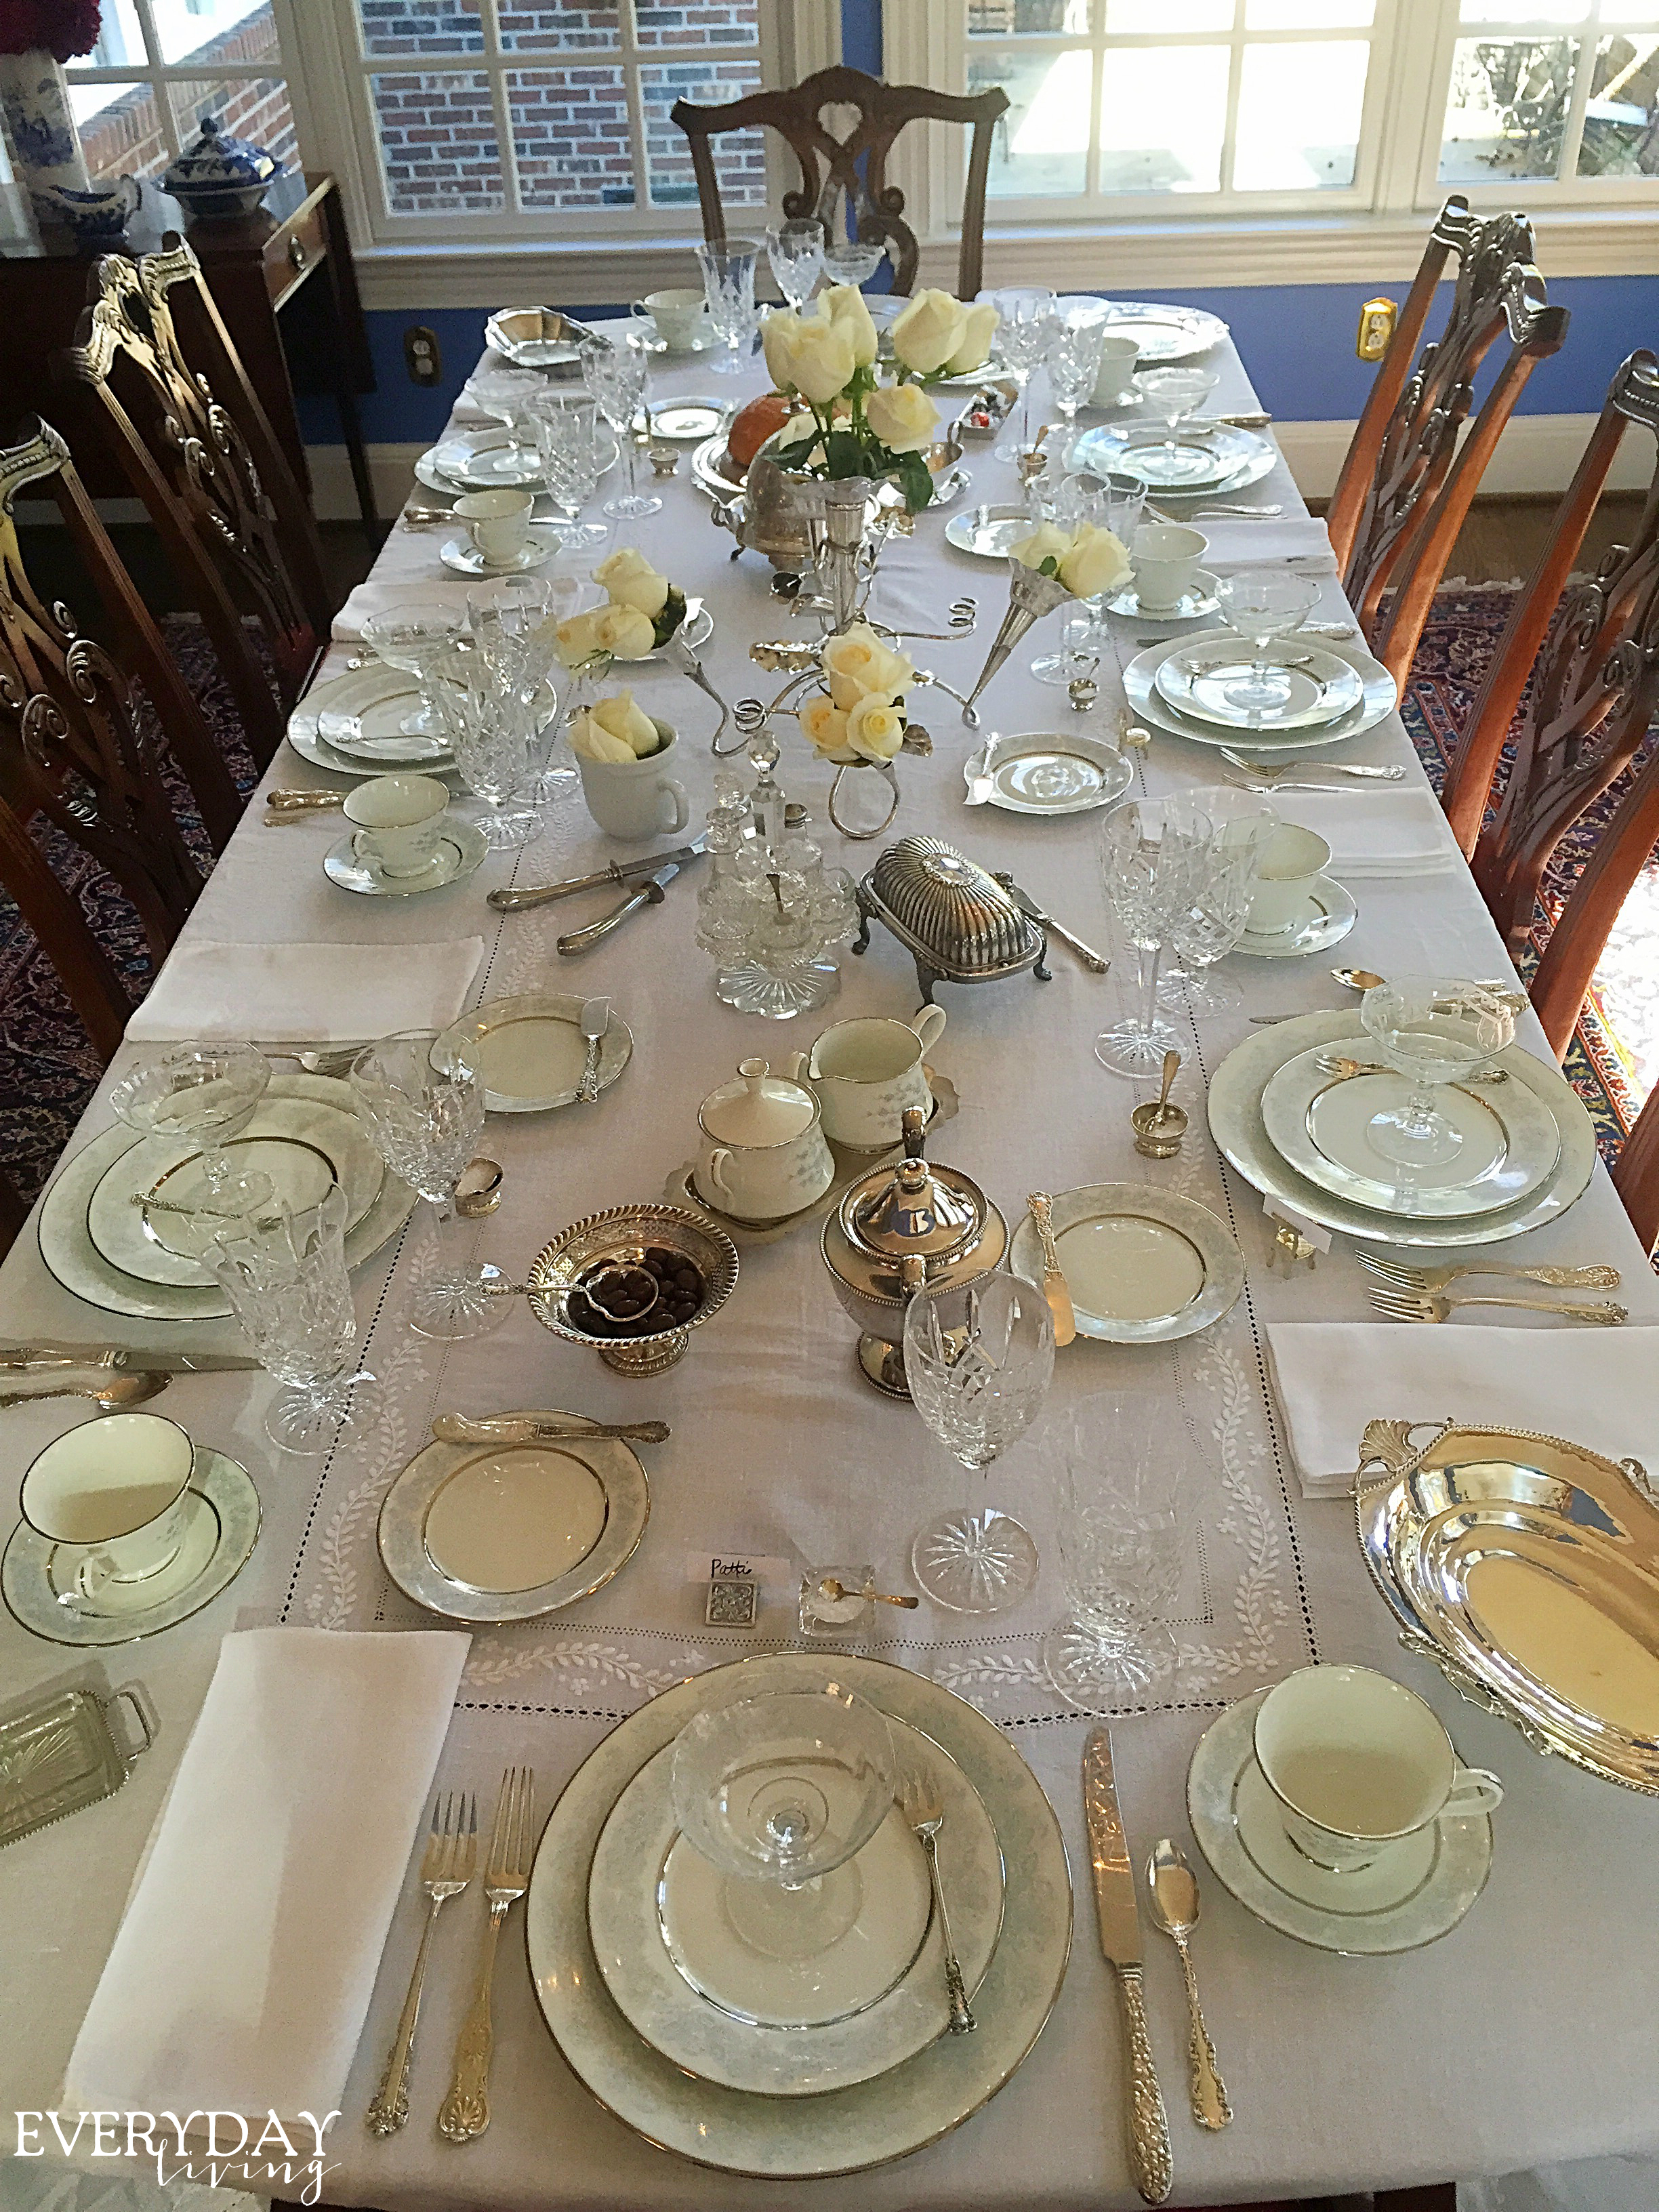 Tablescape Tuesday: Downton Abbey Style